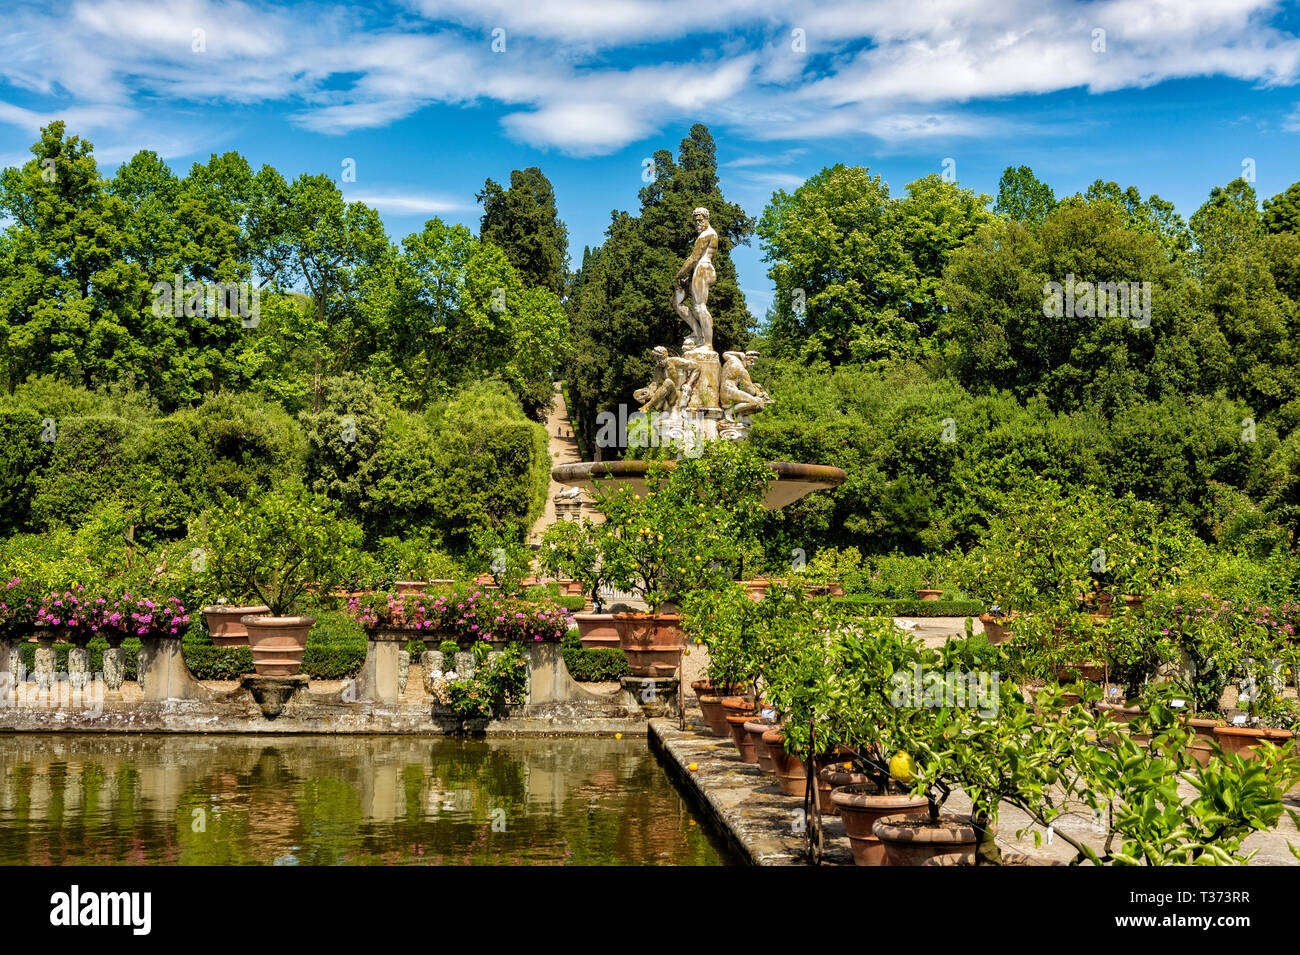 The Boboli Gardens, Florence, Italy, is home to a collection of sculptures dating from the 16th to the 18th centuries, with some Roman antiquities. Stock Photo